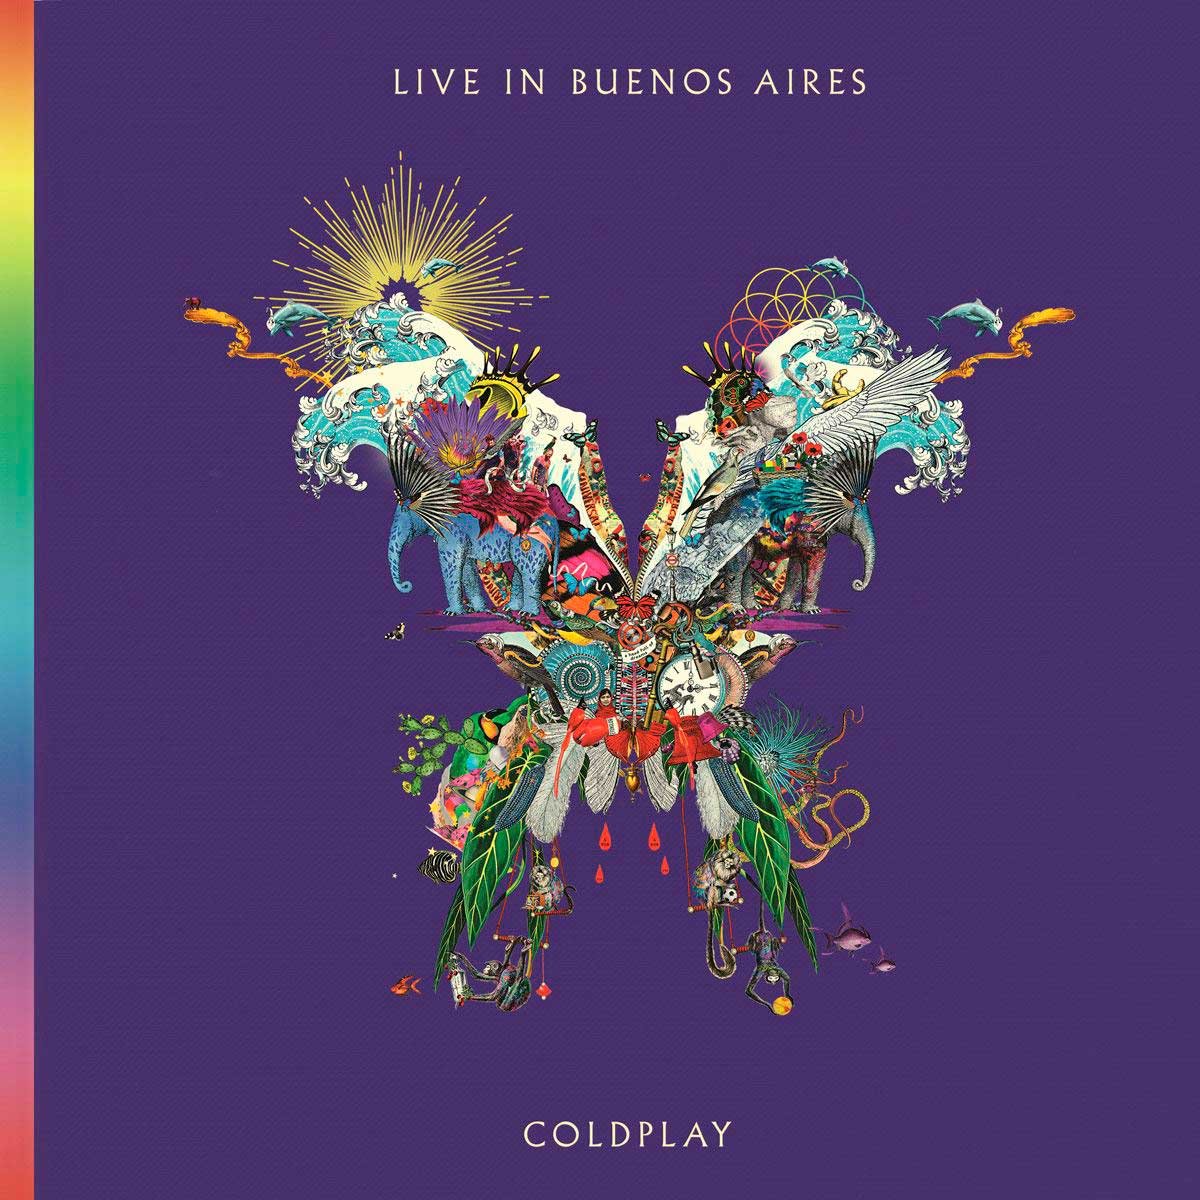 2 Cds Coldplay Live In Buenos Aires